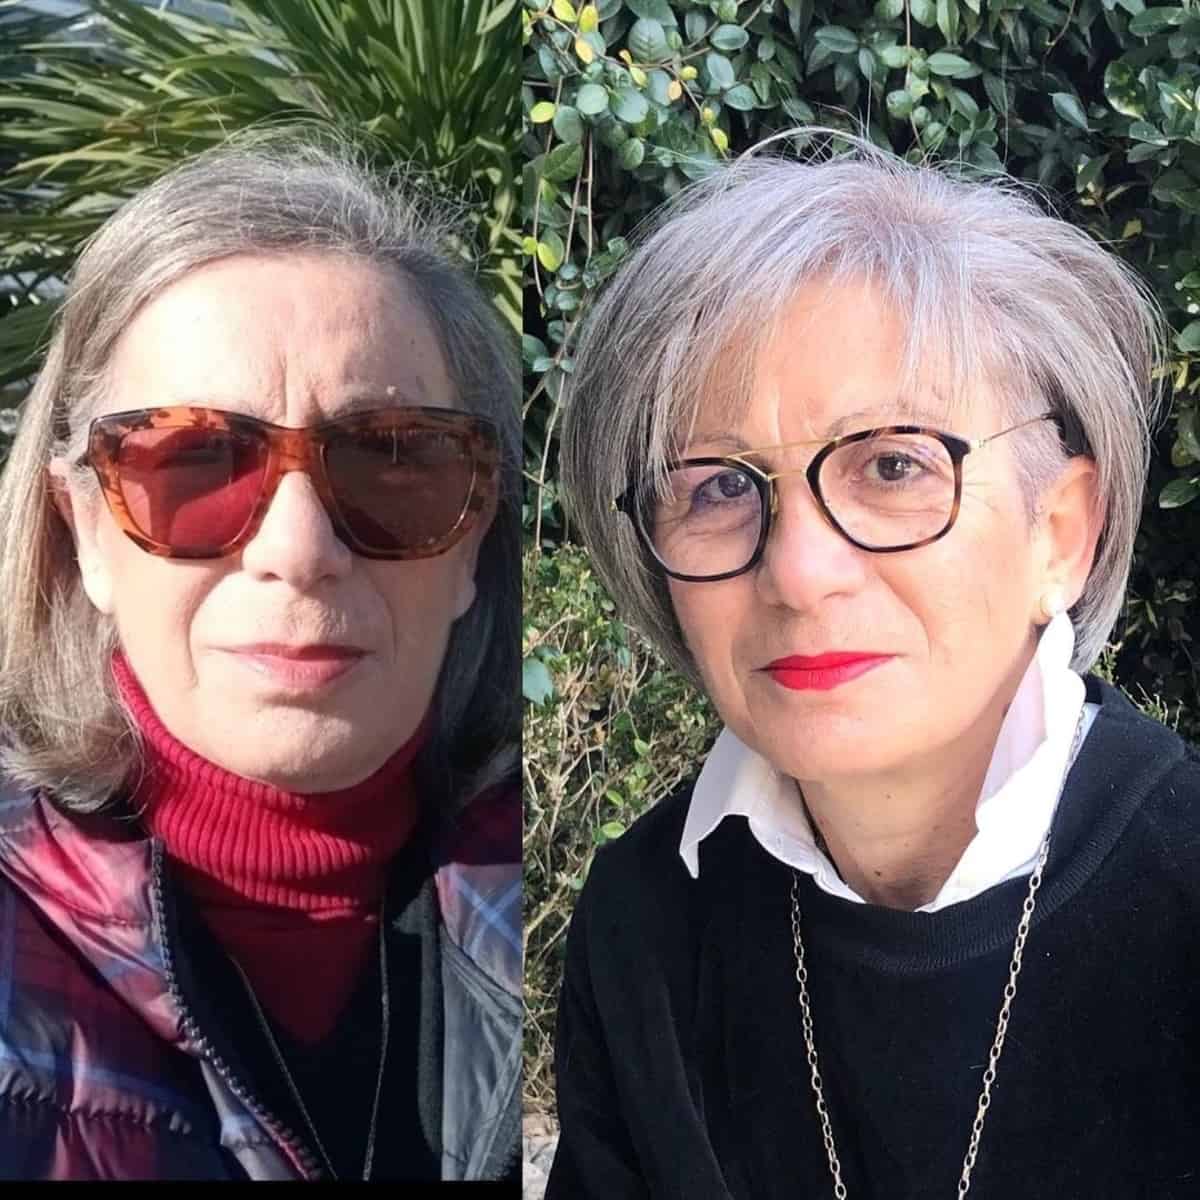 35 Ultra-Flattering Hairstyles for Women Over 70 with Glasses